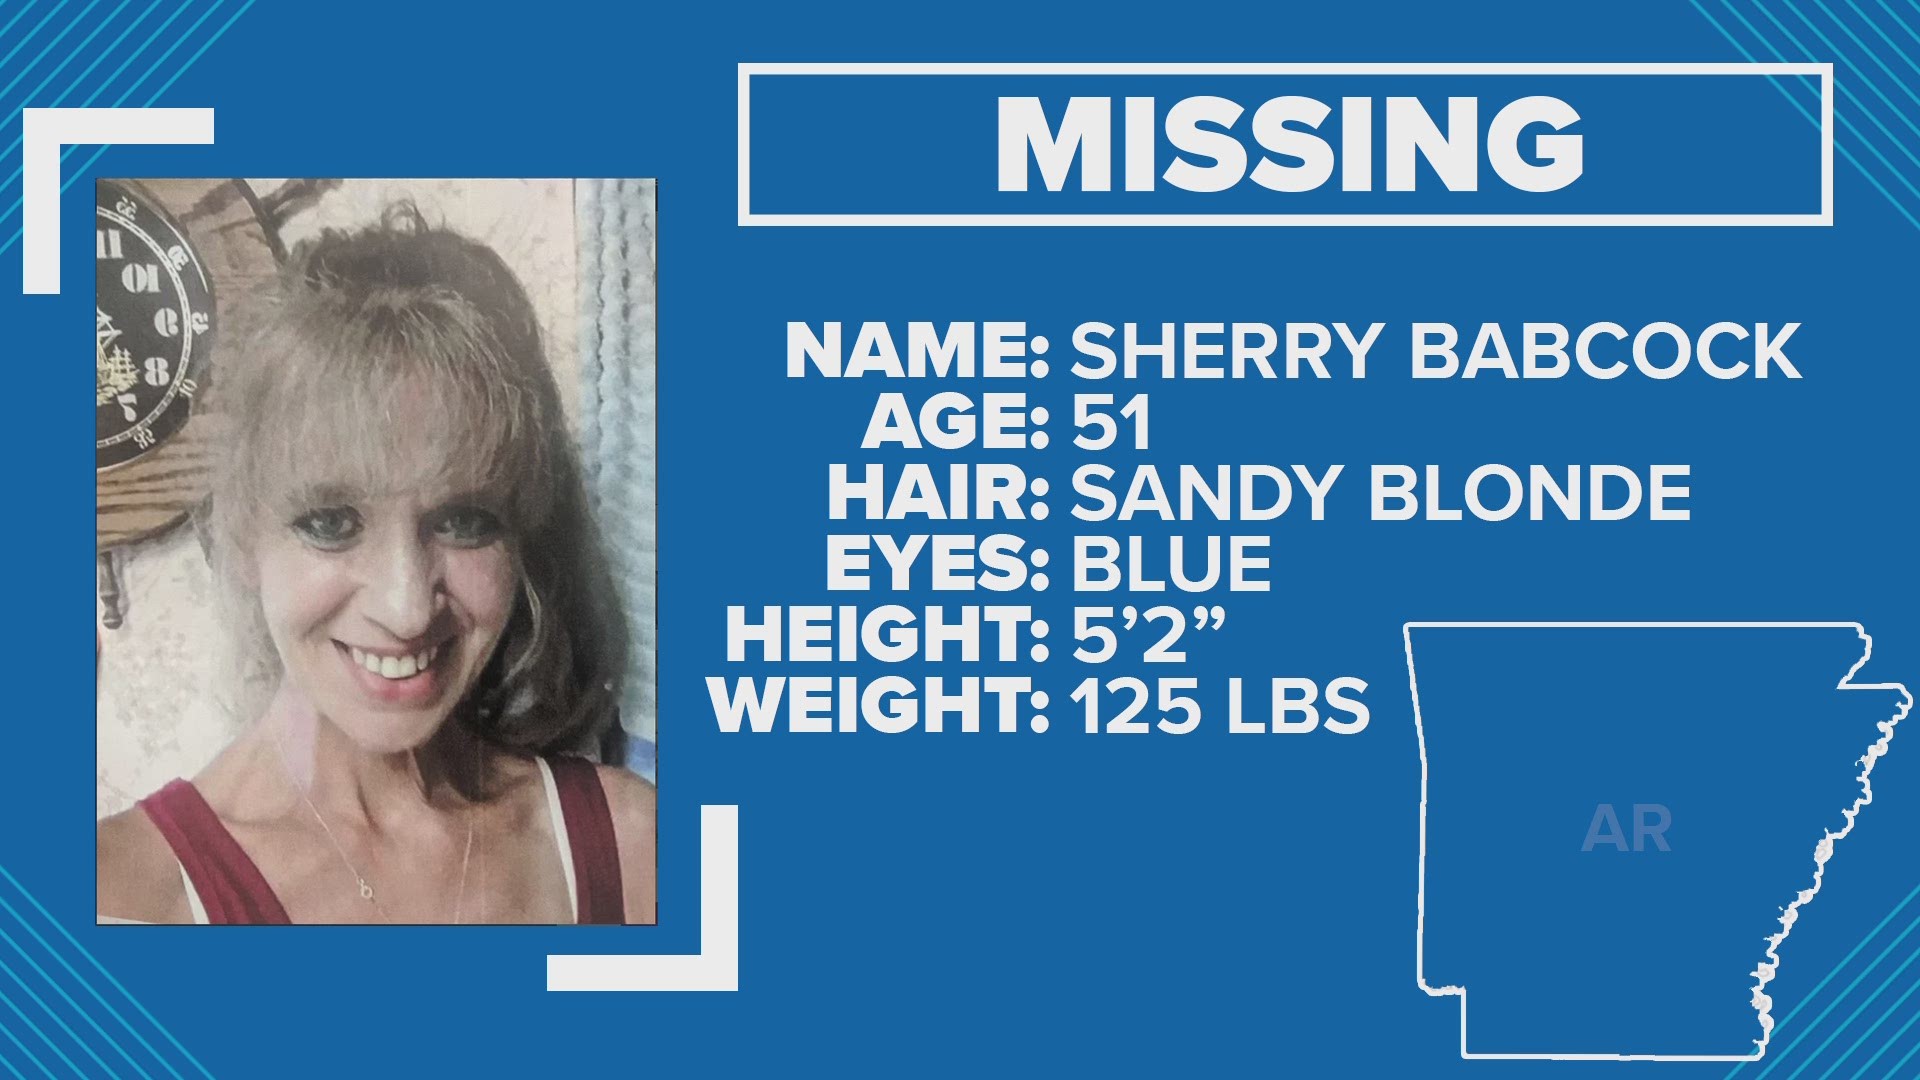 According to the Newton County Sheriff's Office, Sherry Babcock was reported missing Nov. 26.